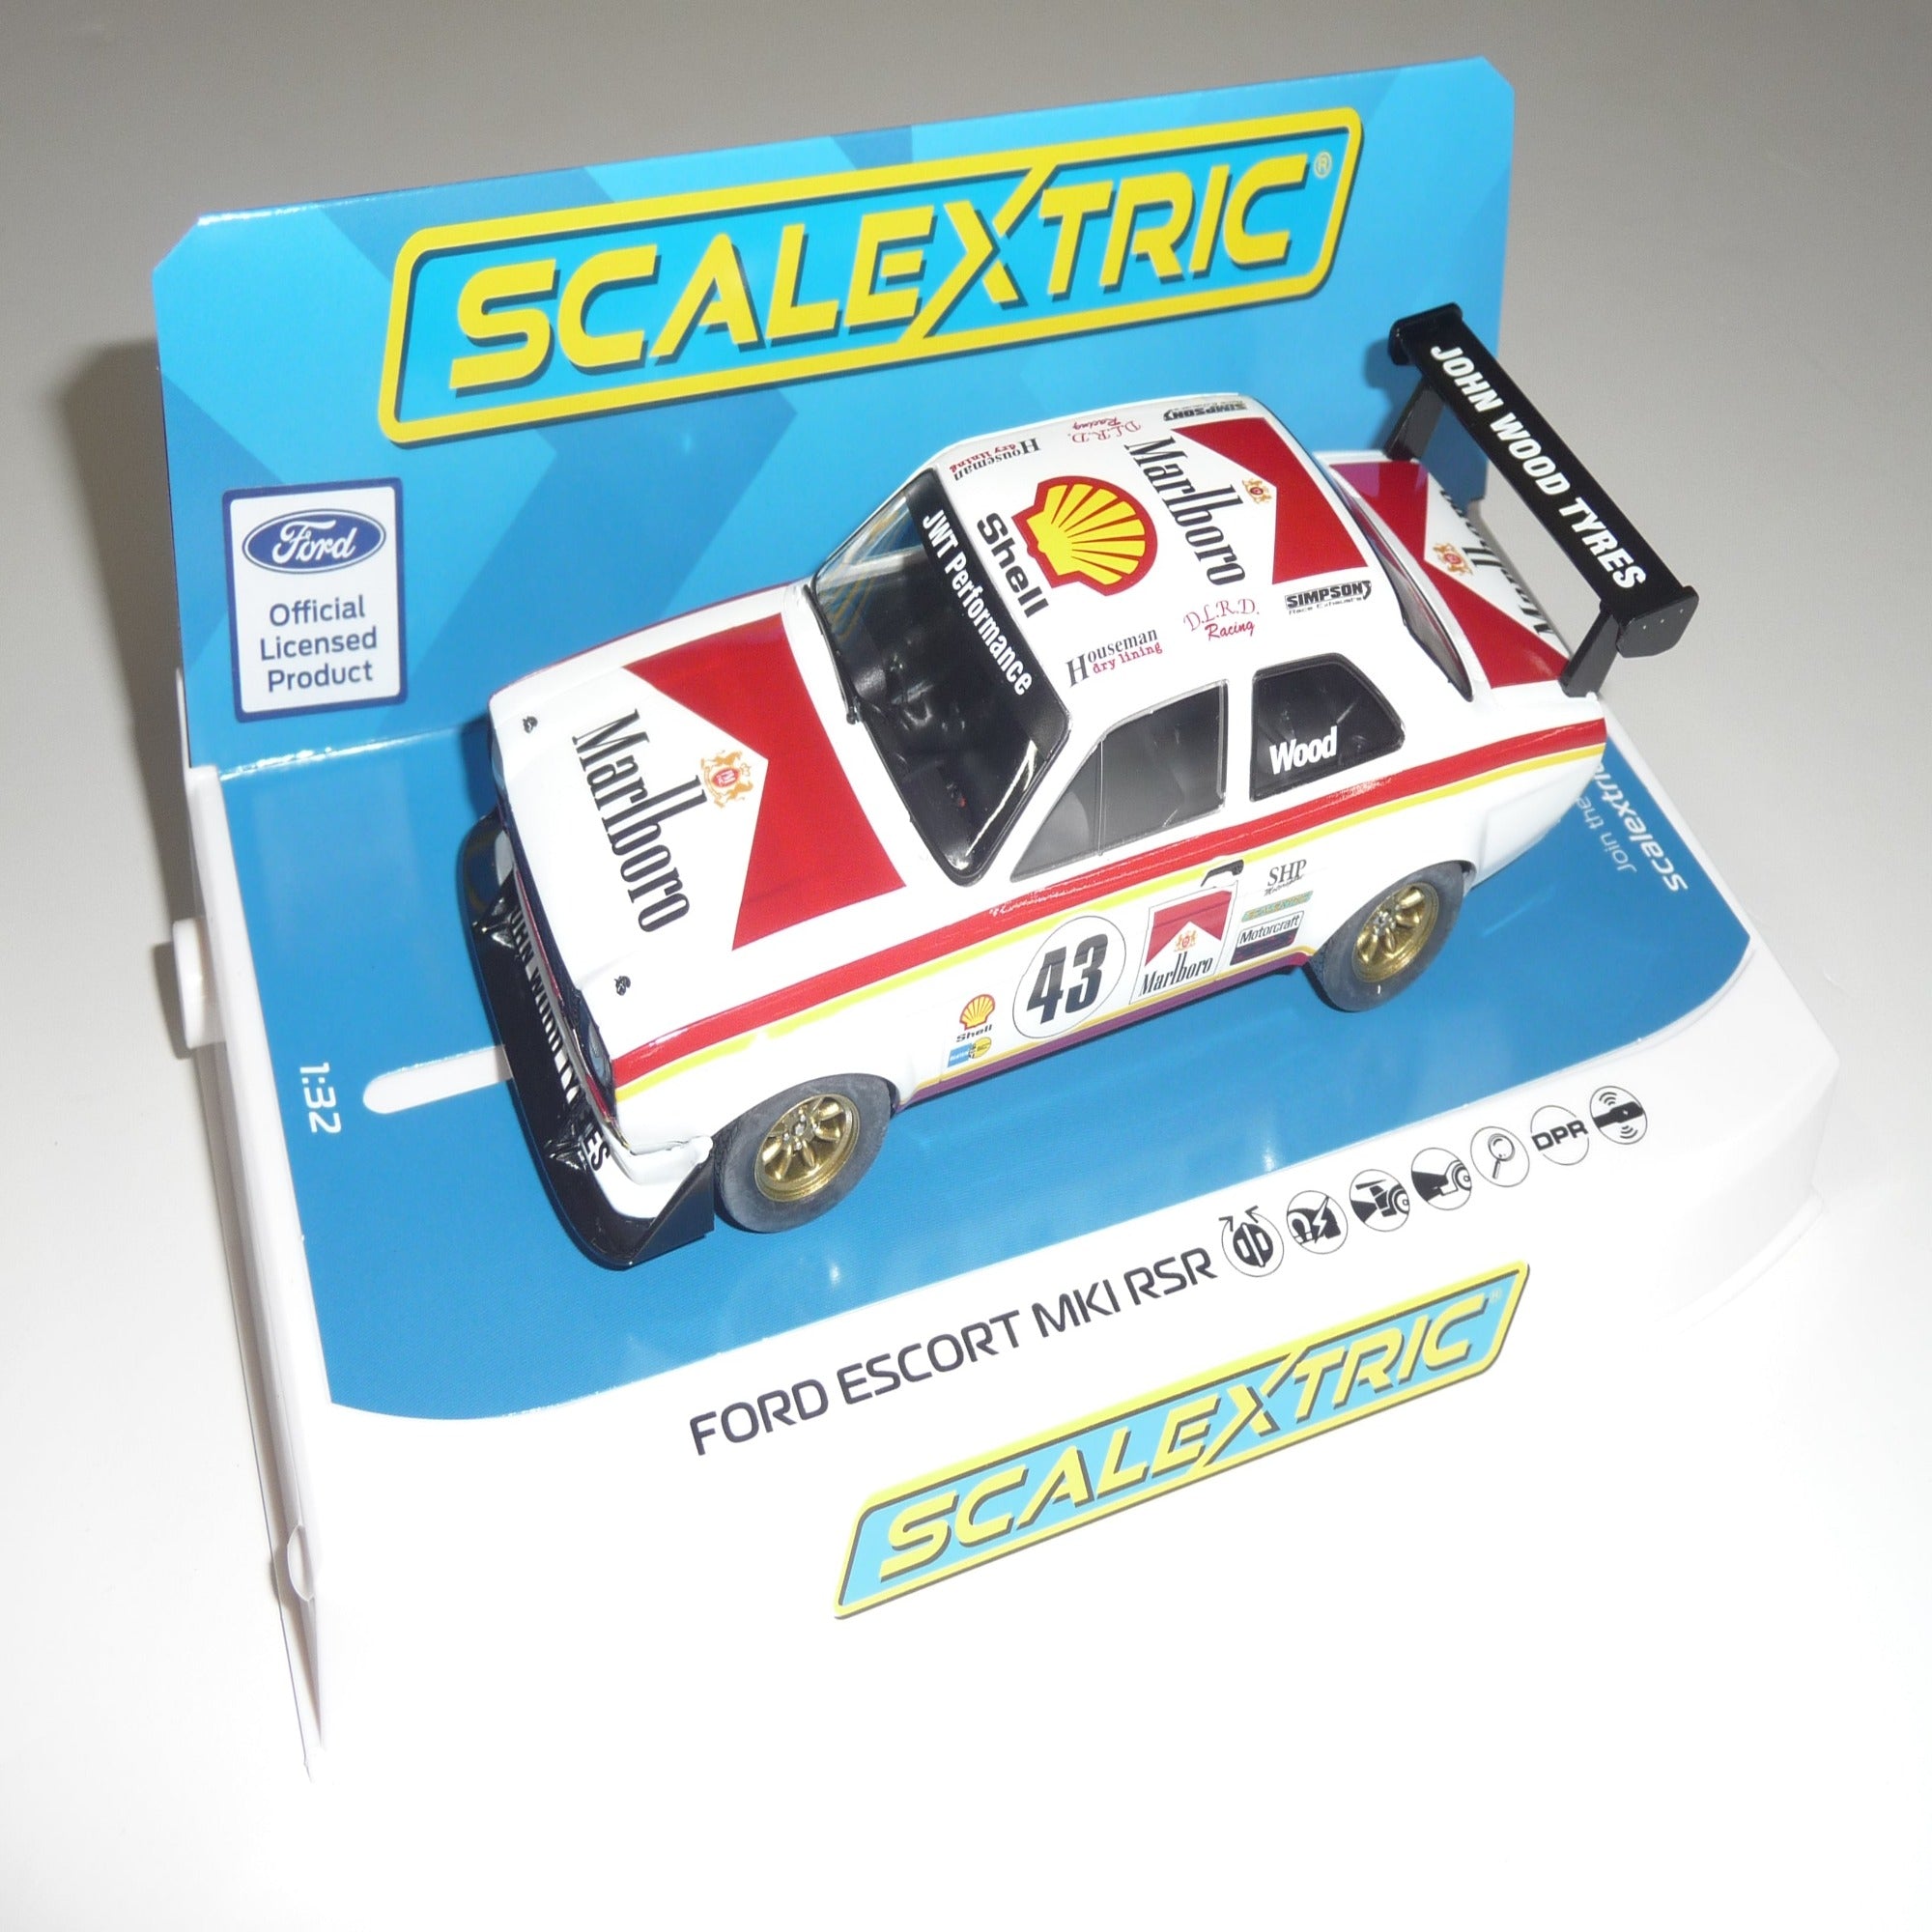 Scalextric  Ford Escort C4421  Free Postage on Orders over $40